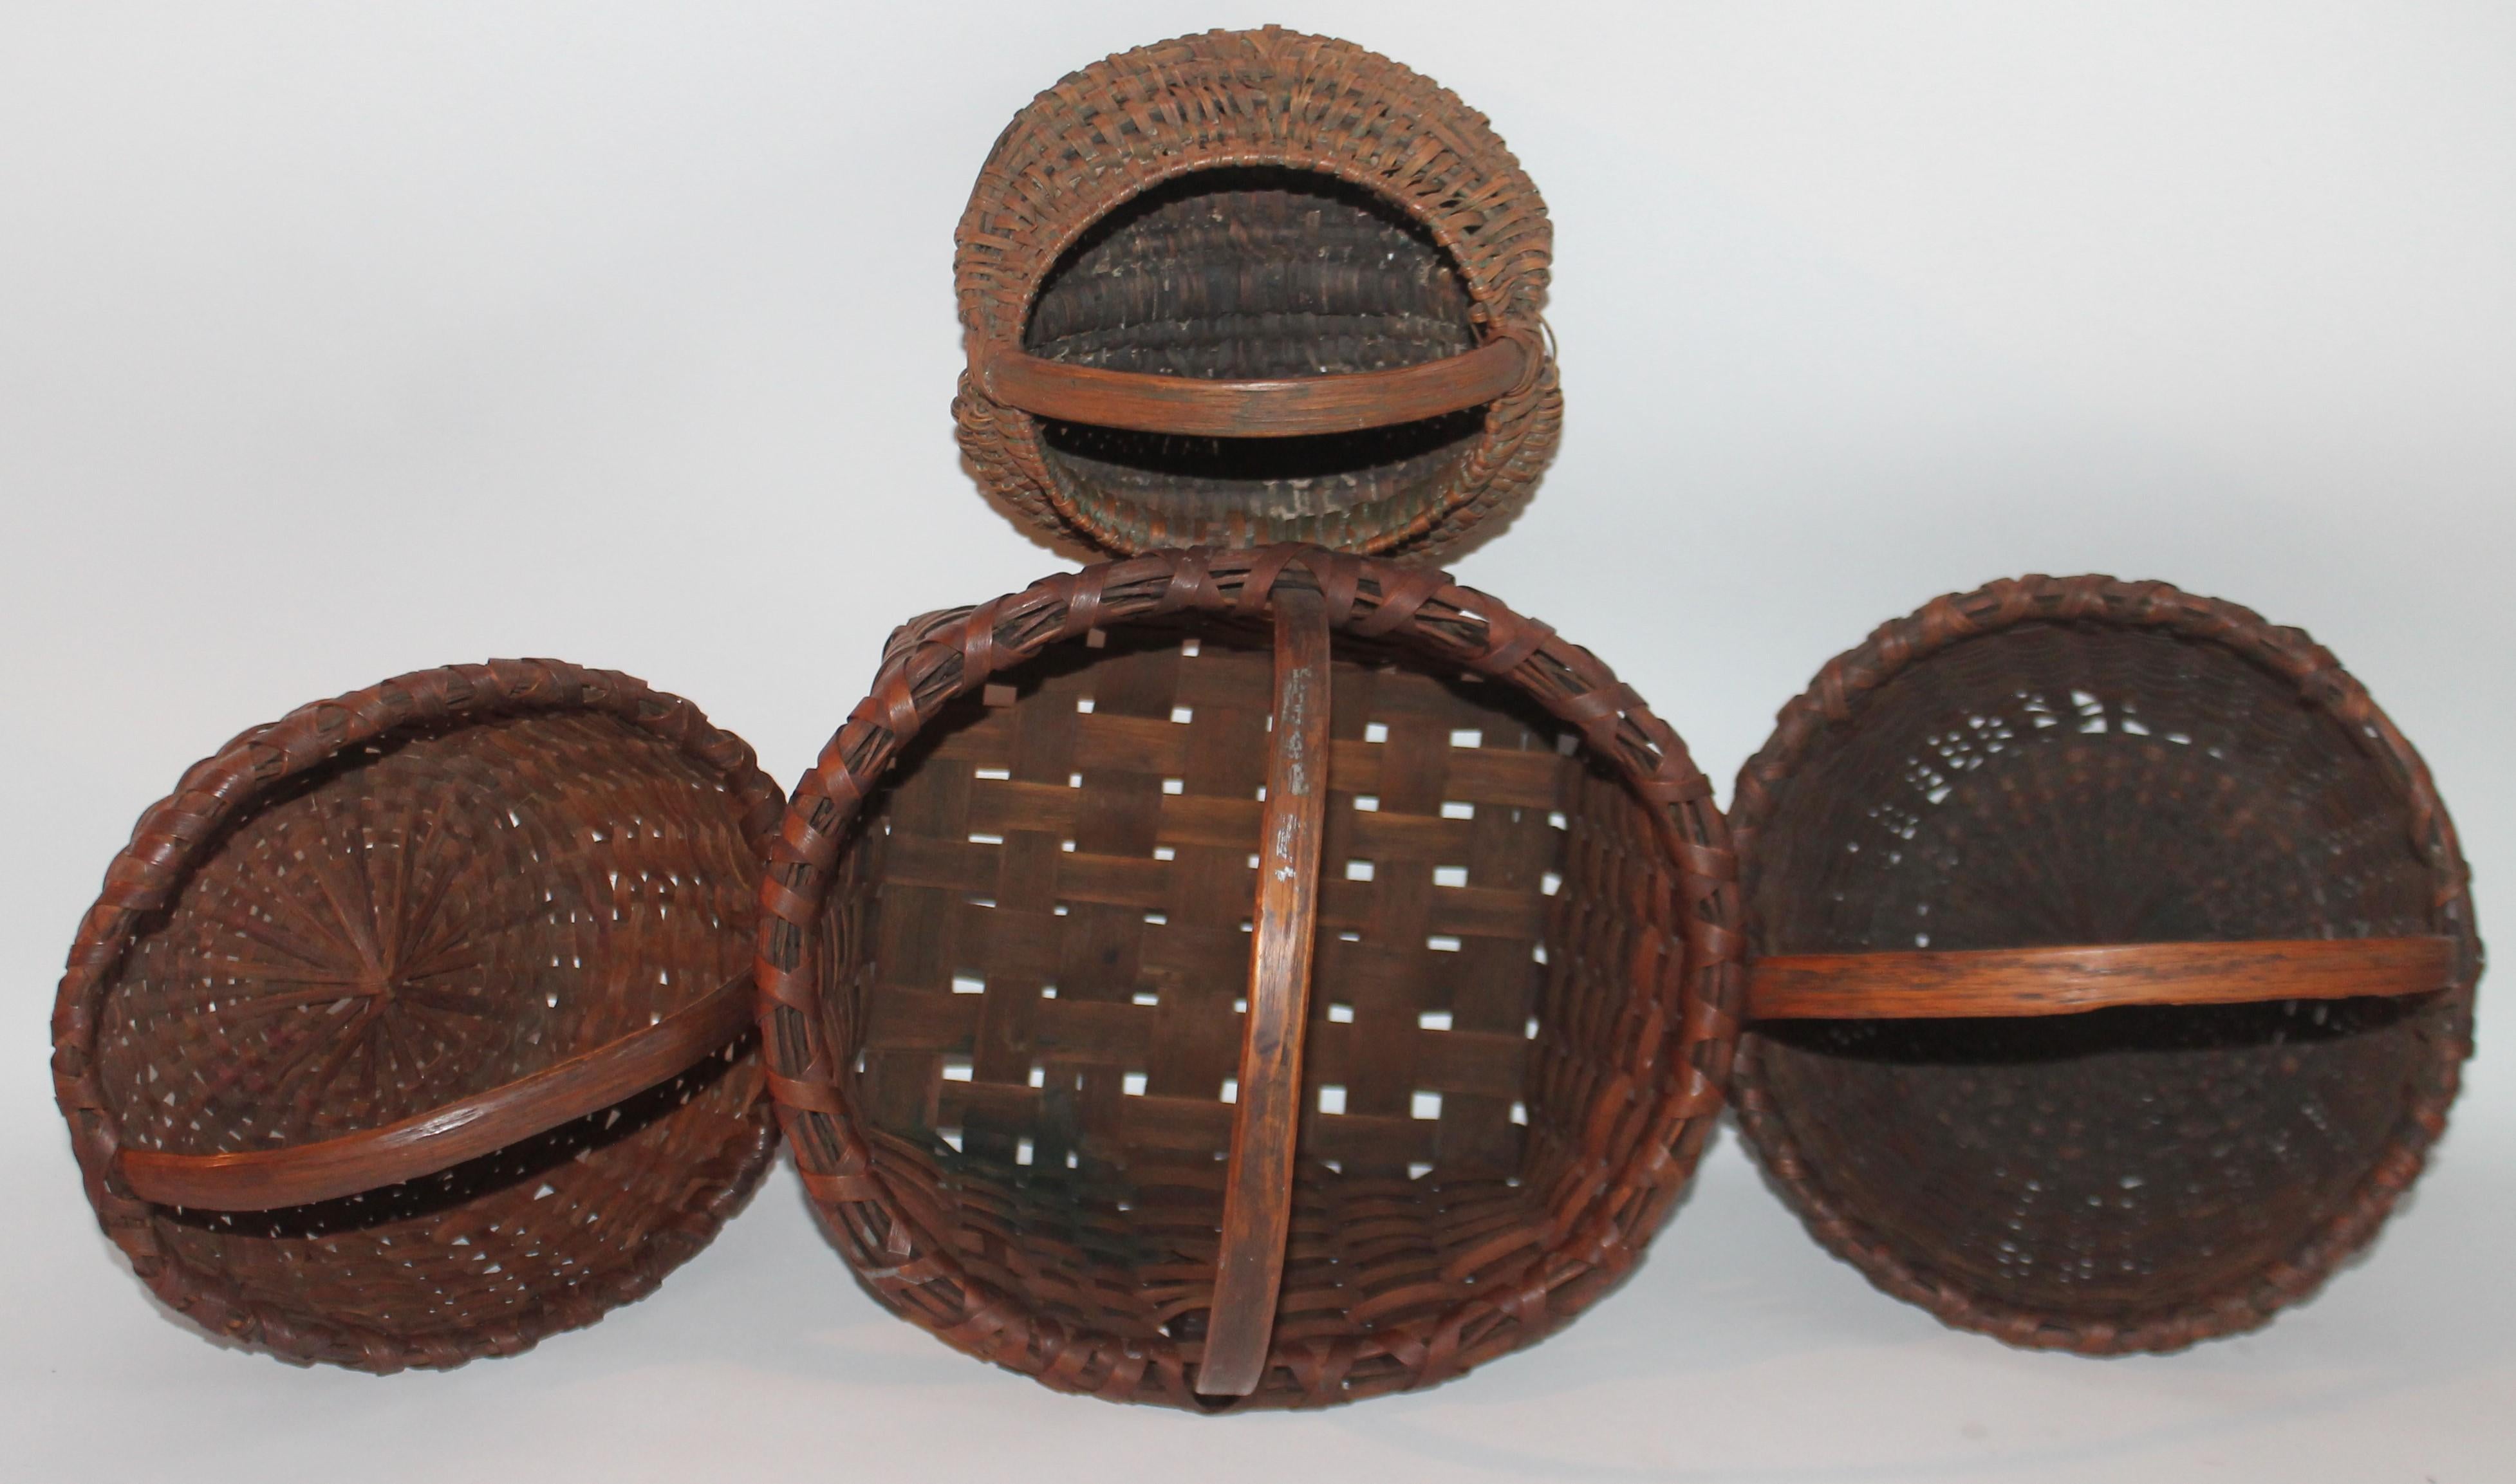 Collection of 19th century handmade baskets. All have amazing patina and are in excellent used condition.

Baskets measures:

Buttocks basket - 7.5 W x 7 D x 6 H
Larges basket - 11.5 x 10.5 x 10
Kick up basket oval - 8.5 W x 10 D x 7.5